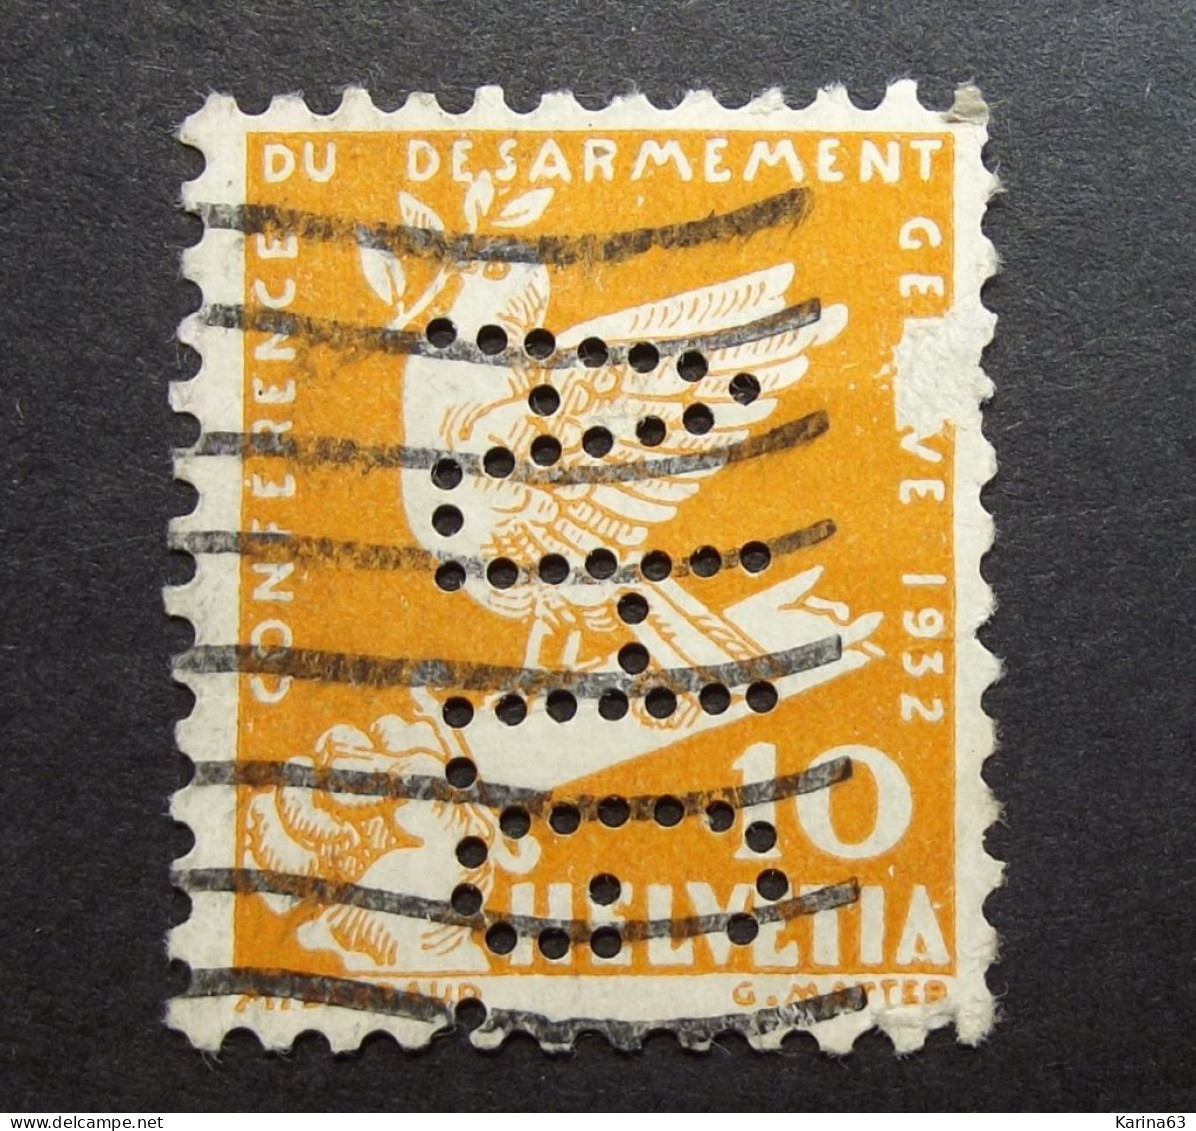 Suisse - Switzerland  - Perfin - Lochung - A. H. G  - A.H. Guggenheim AG - 1906 - 1945 -  Cancelled - Perfins